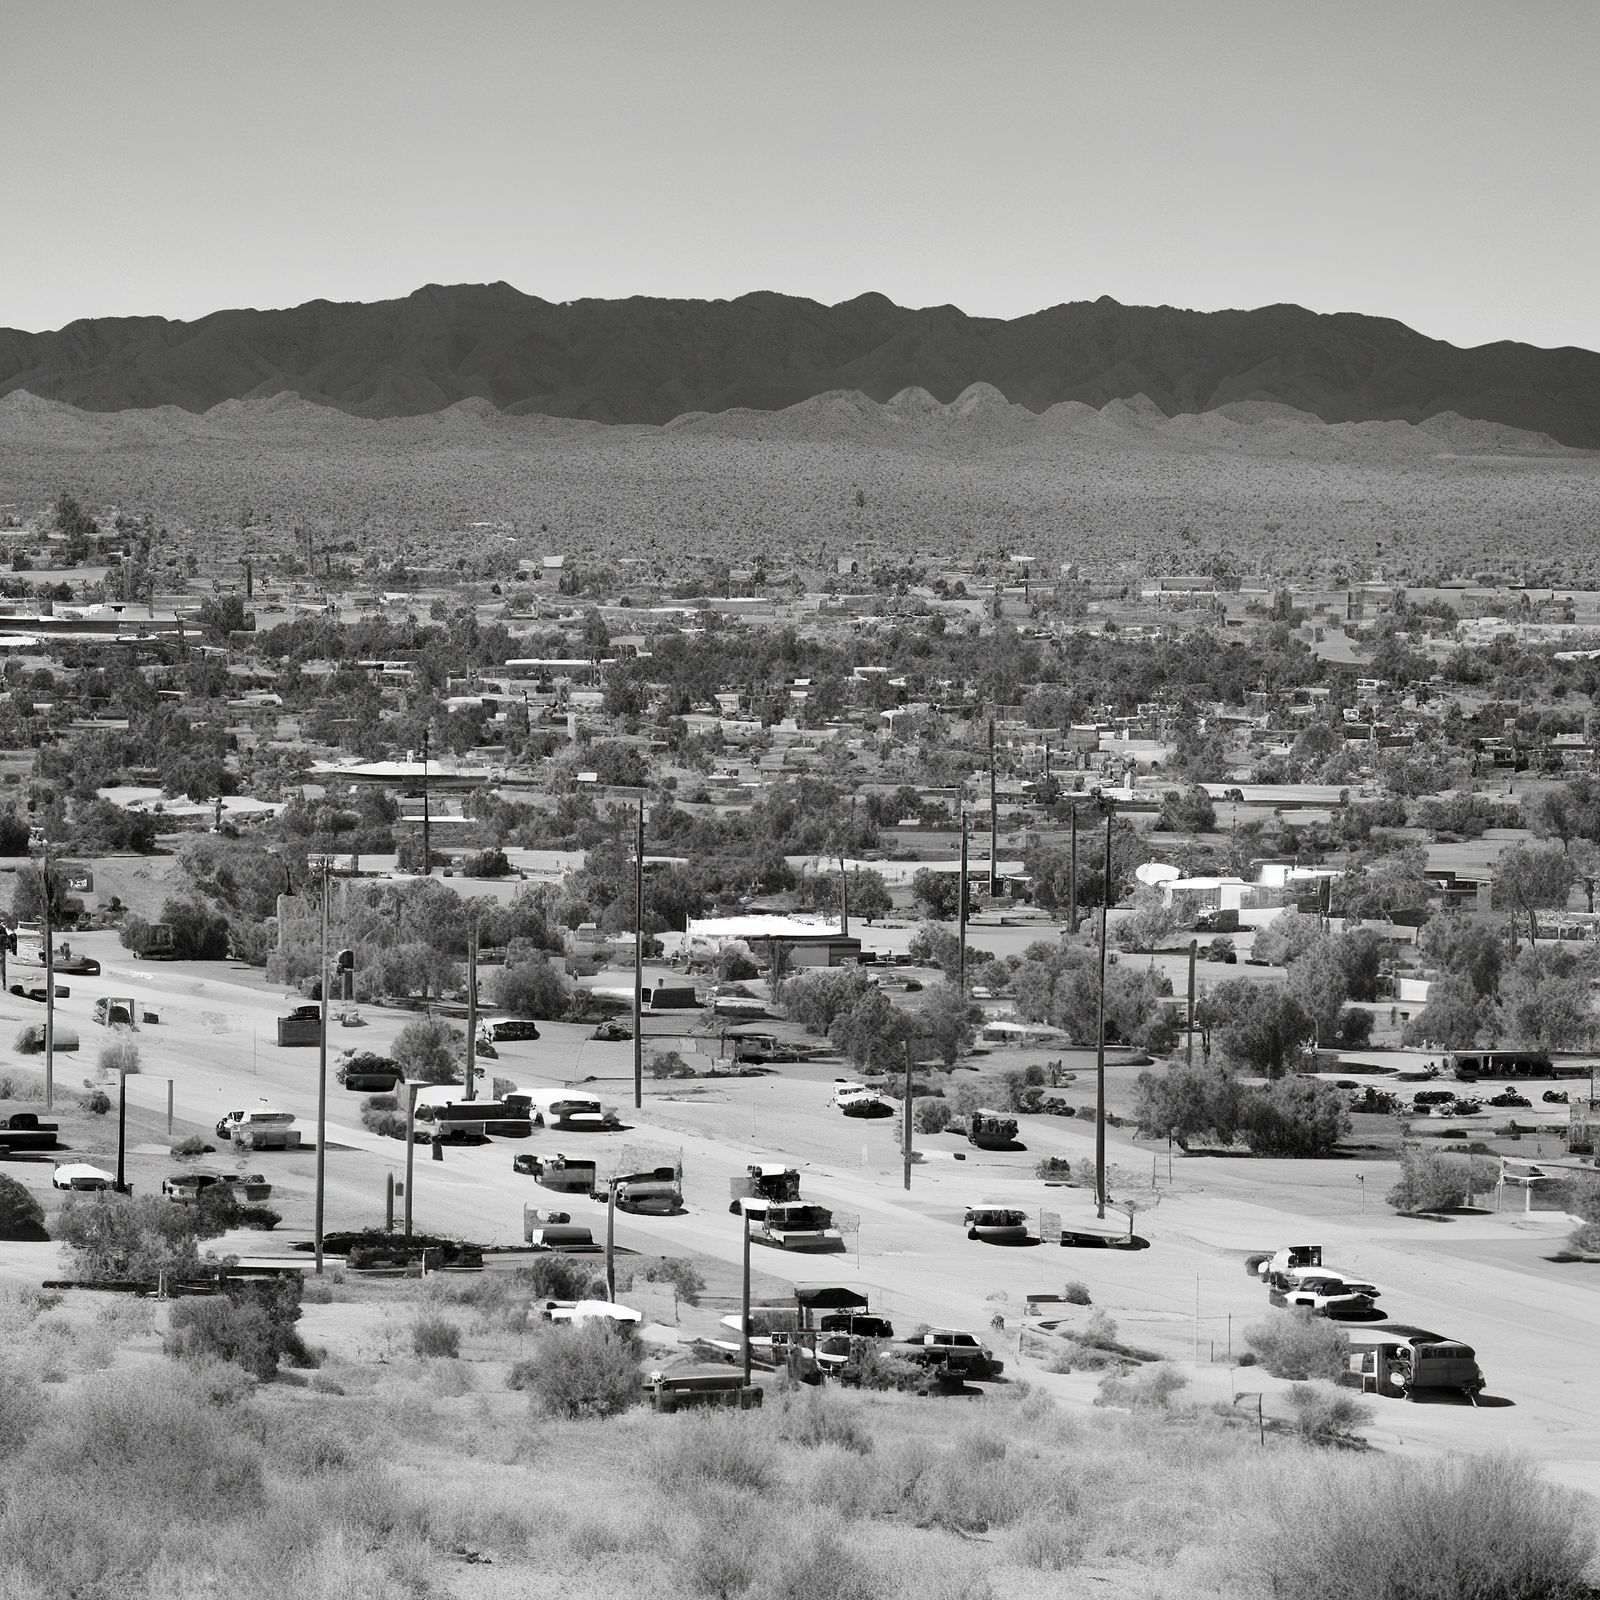 © Craig Ames - Untitled View (Albuquerque) [1]. (Possibly After Joe Deal )